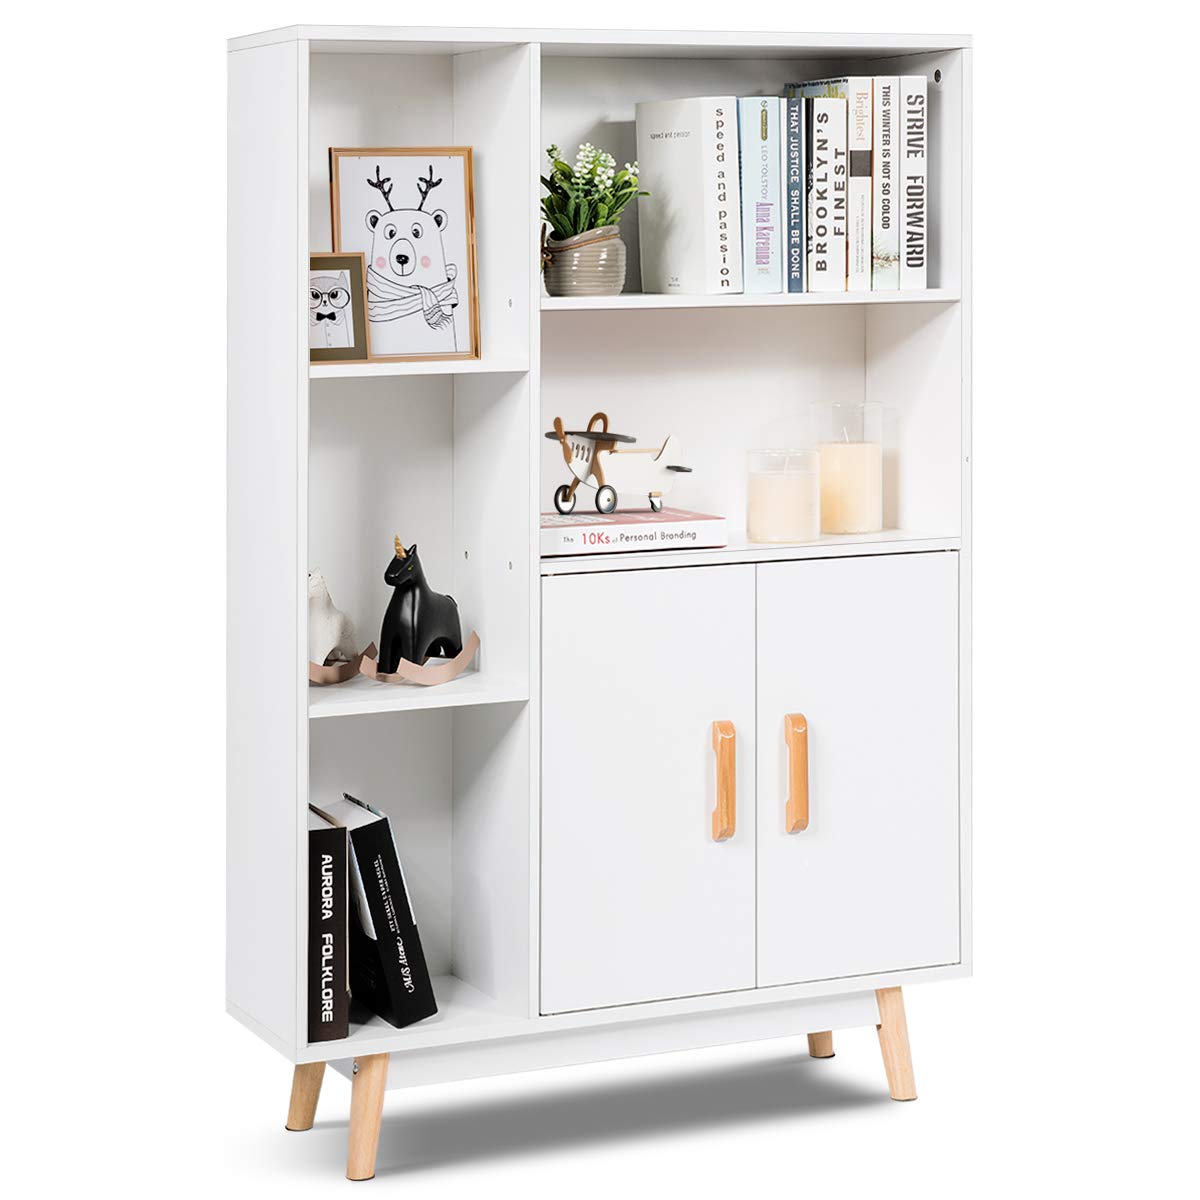 Giantex Storage Cabinet, Free Standing Pantry Cabinet with 2 Door Cabinet and 5 Shelves